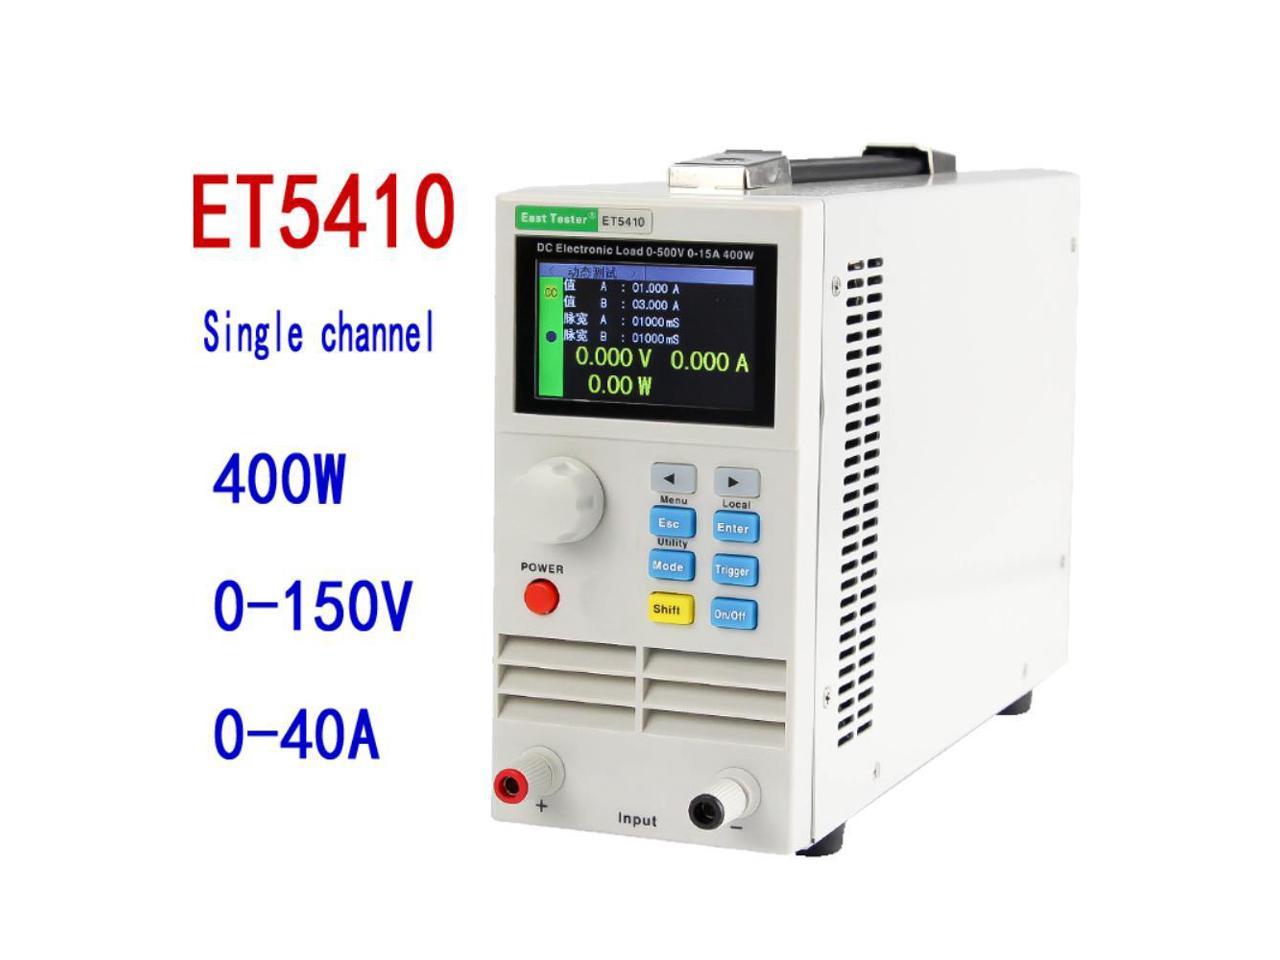 Details about   ET5410 Single Channel Programmable DC Electronic Load 400W 0-150V 0-40A NEW 